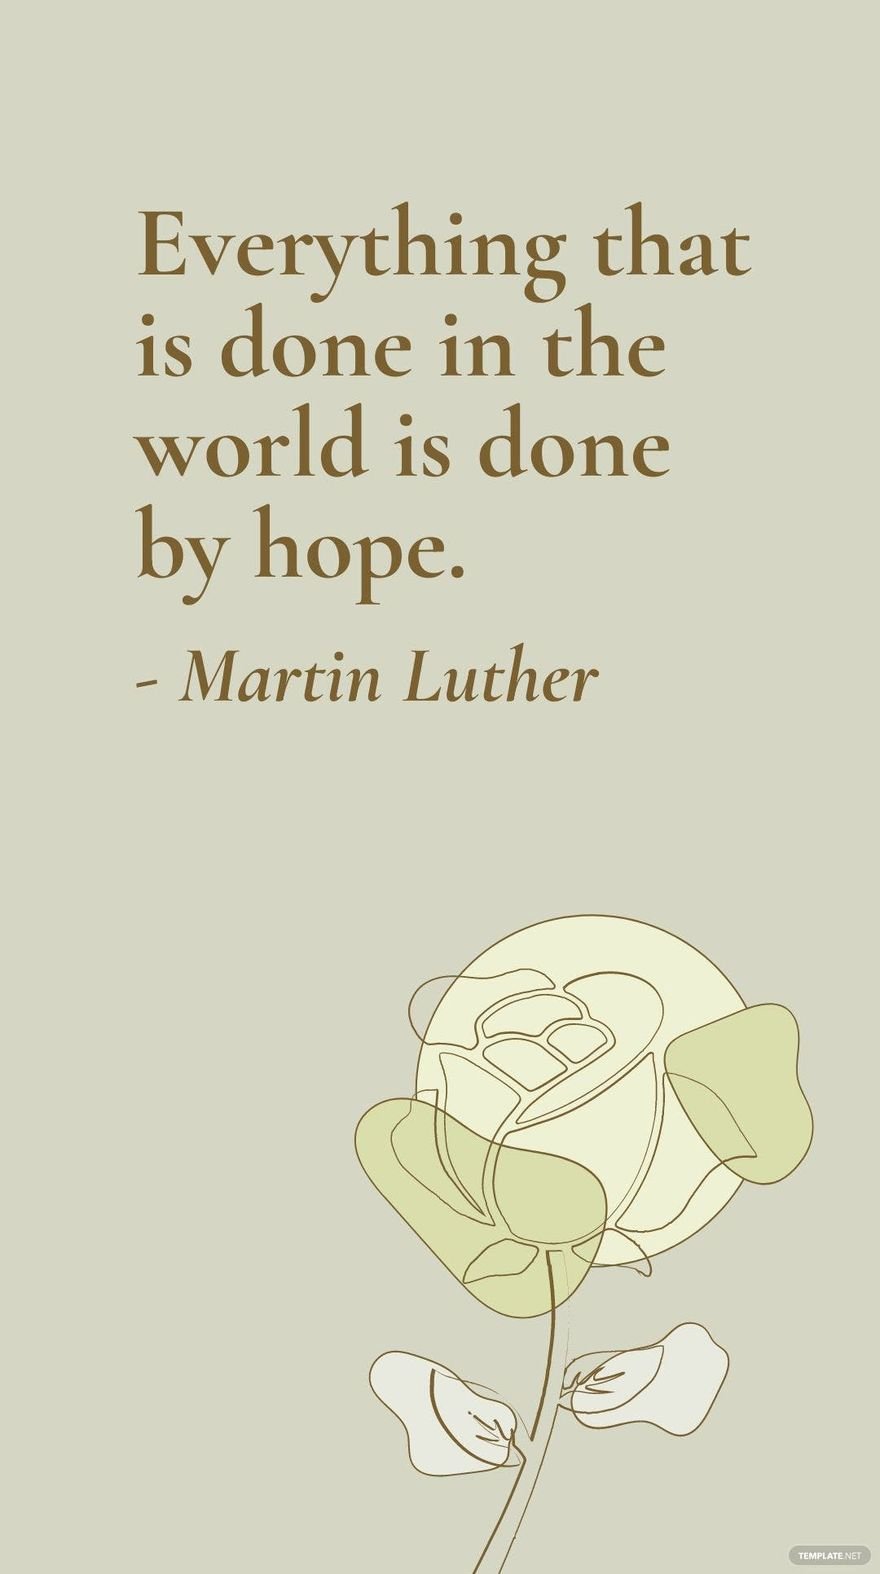 Martin Luther - Everything that is done in the world is done by hope.